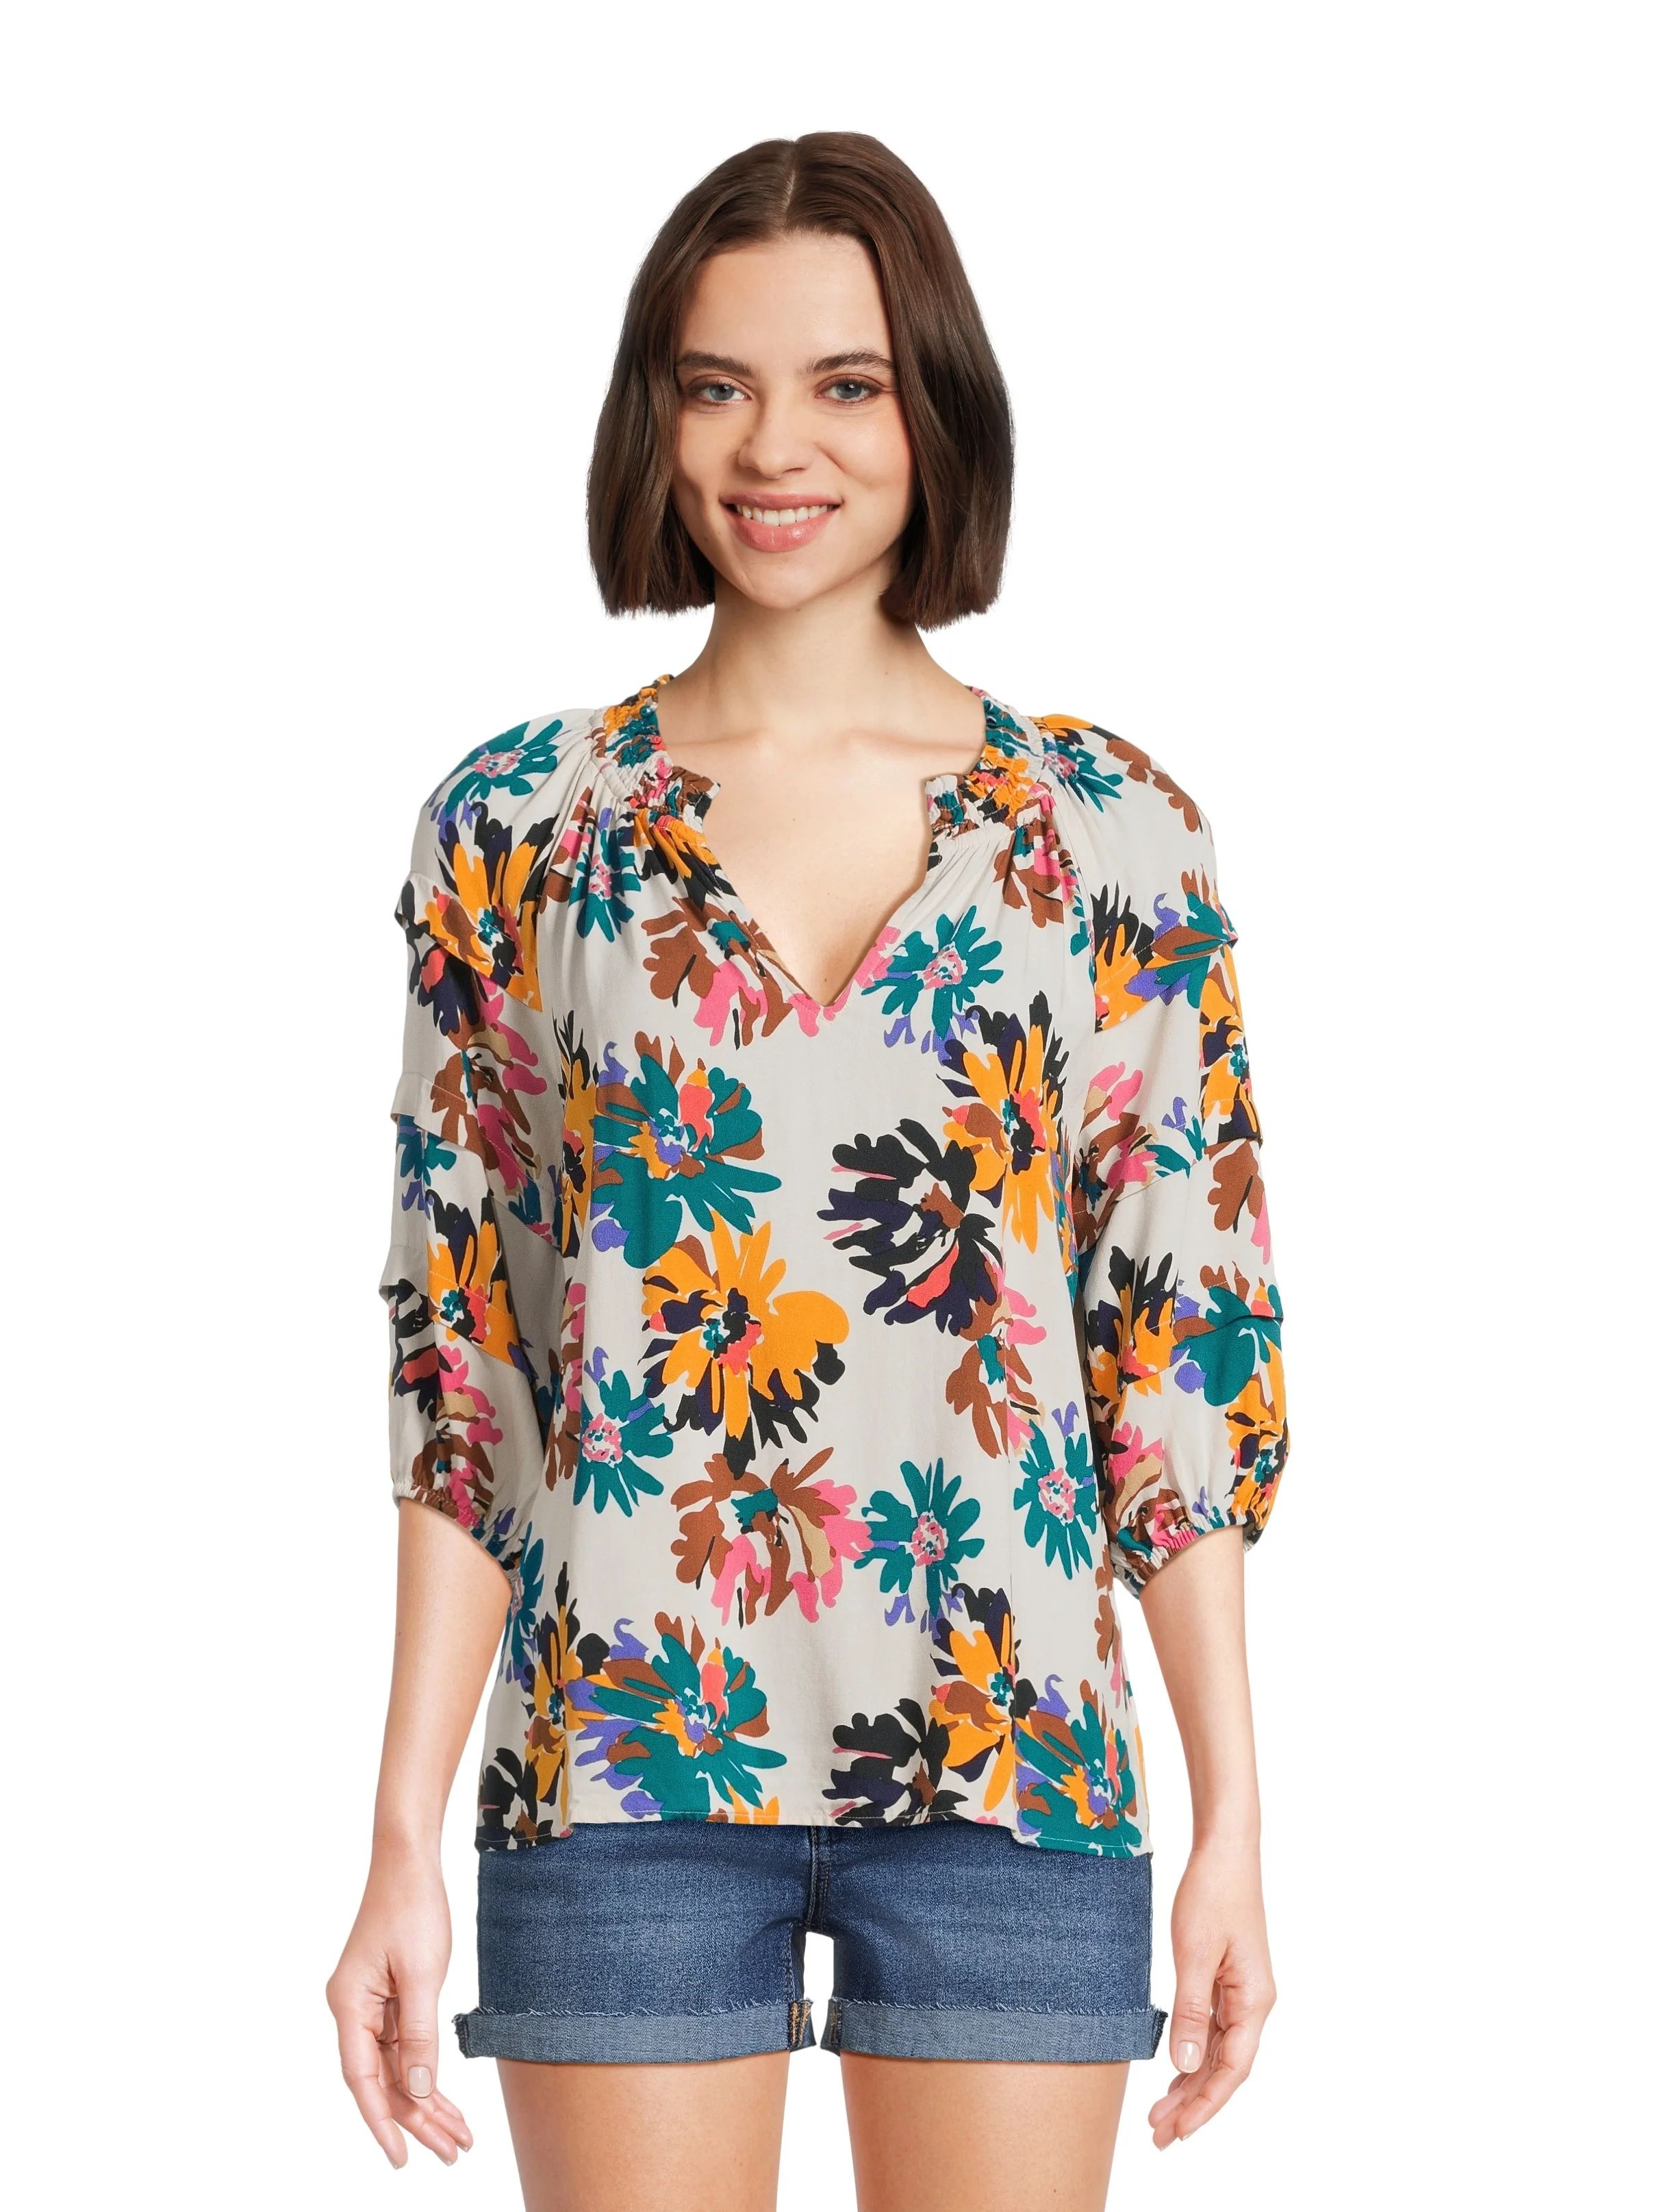 The Pioneer Woman Smocked Collar Peasant Blouse with 3/4-Length Sleeves, Women's, Sizes XS-3X | Walmart (US)